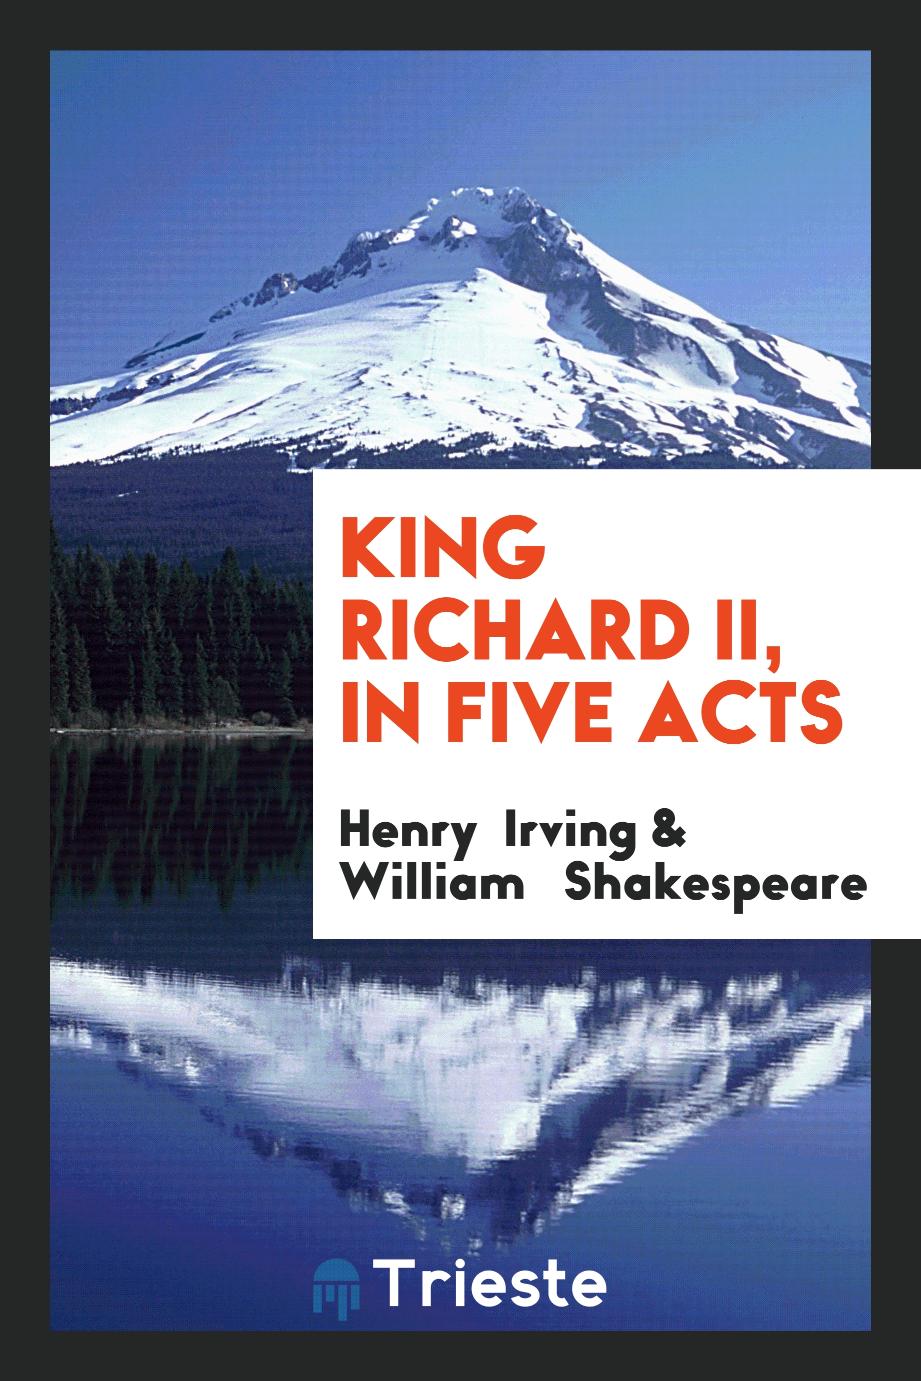 King Richard II, in five acts